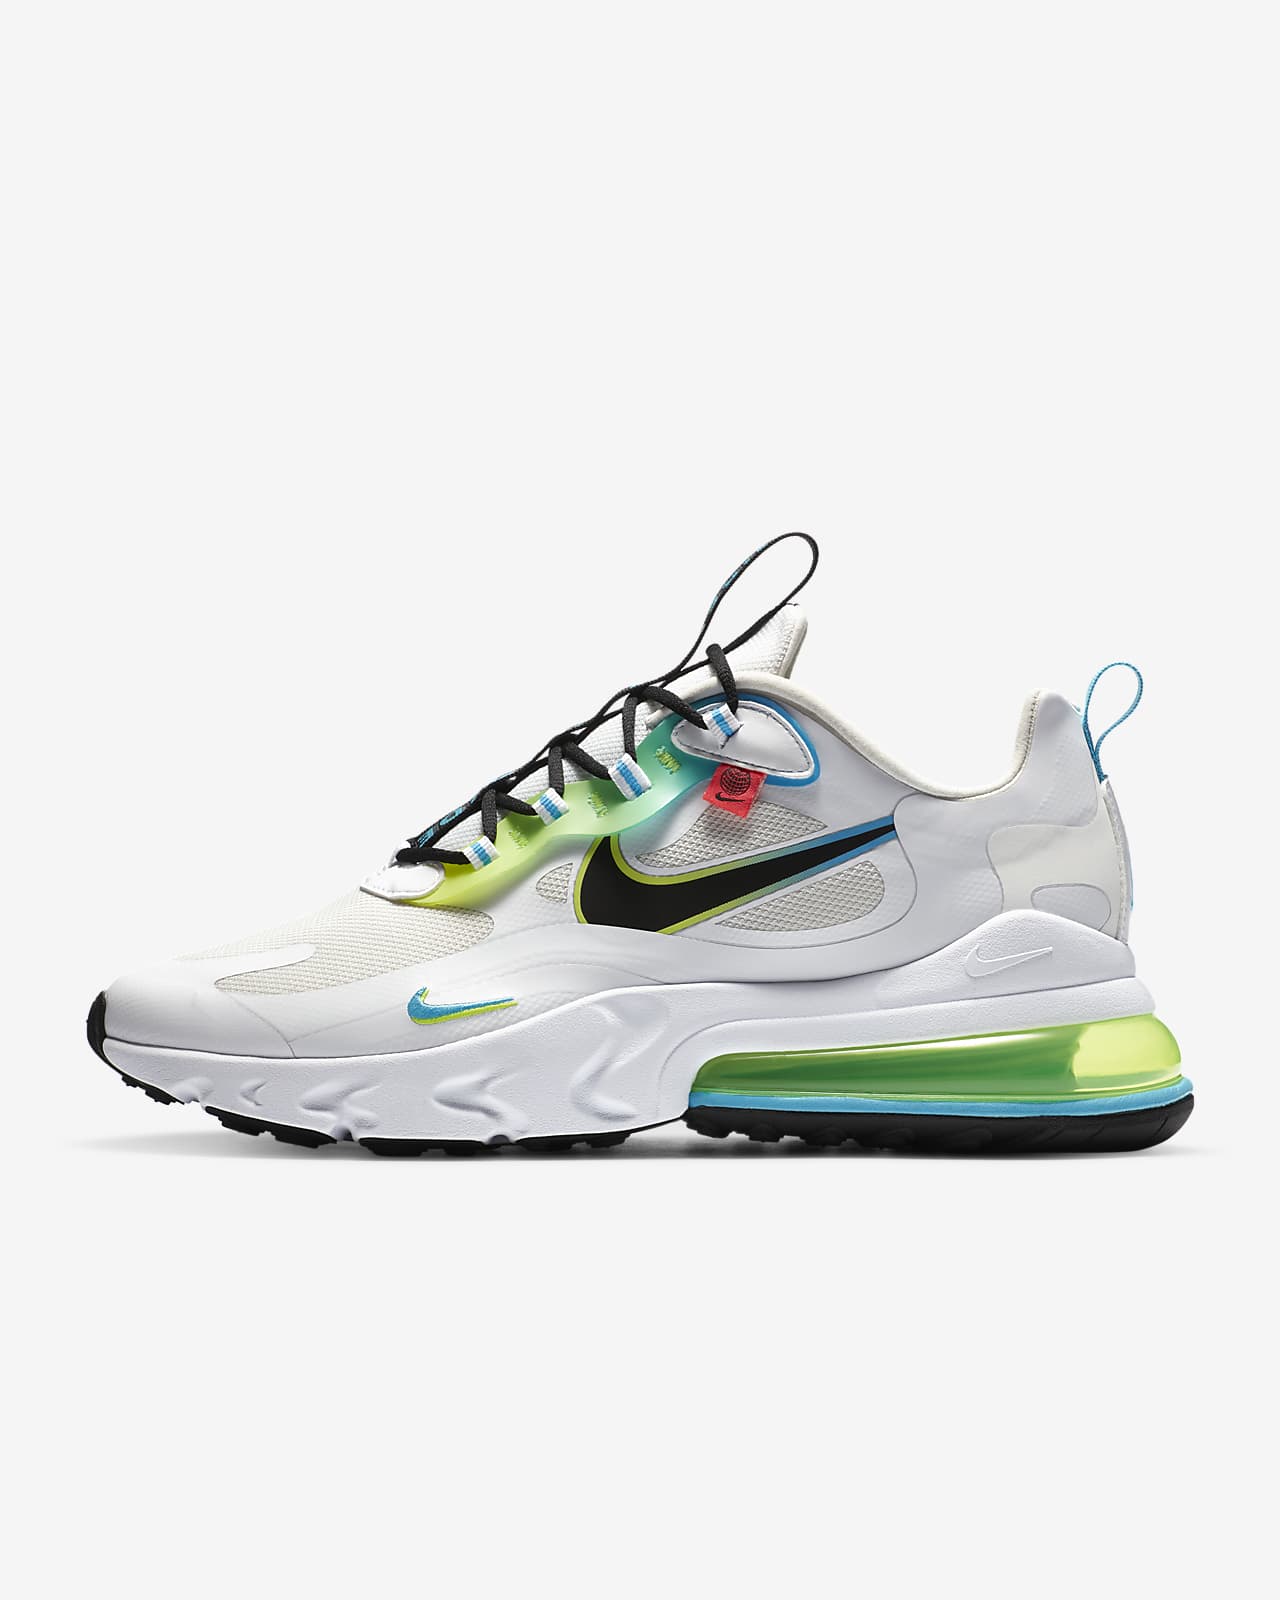 nike white and grey air max 27 sneakers